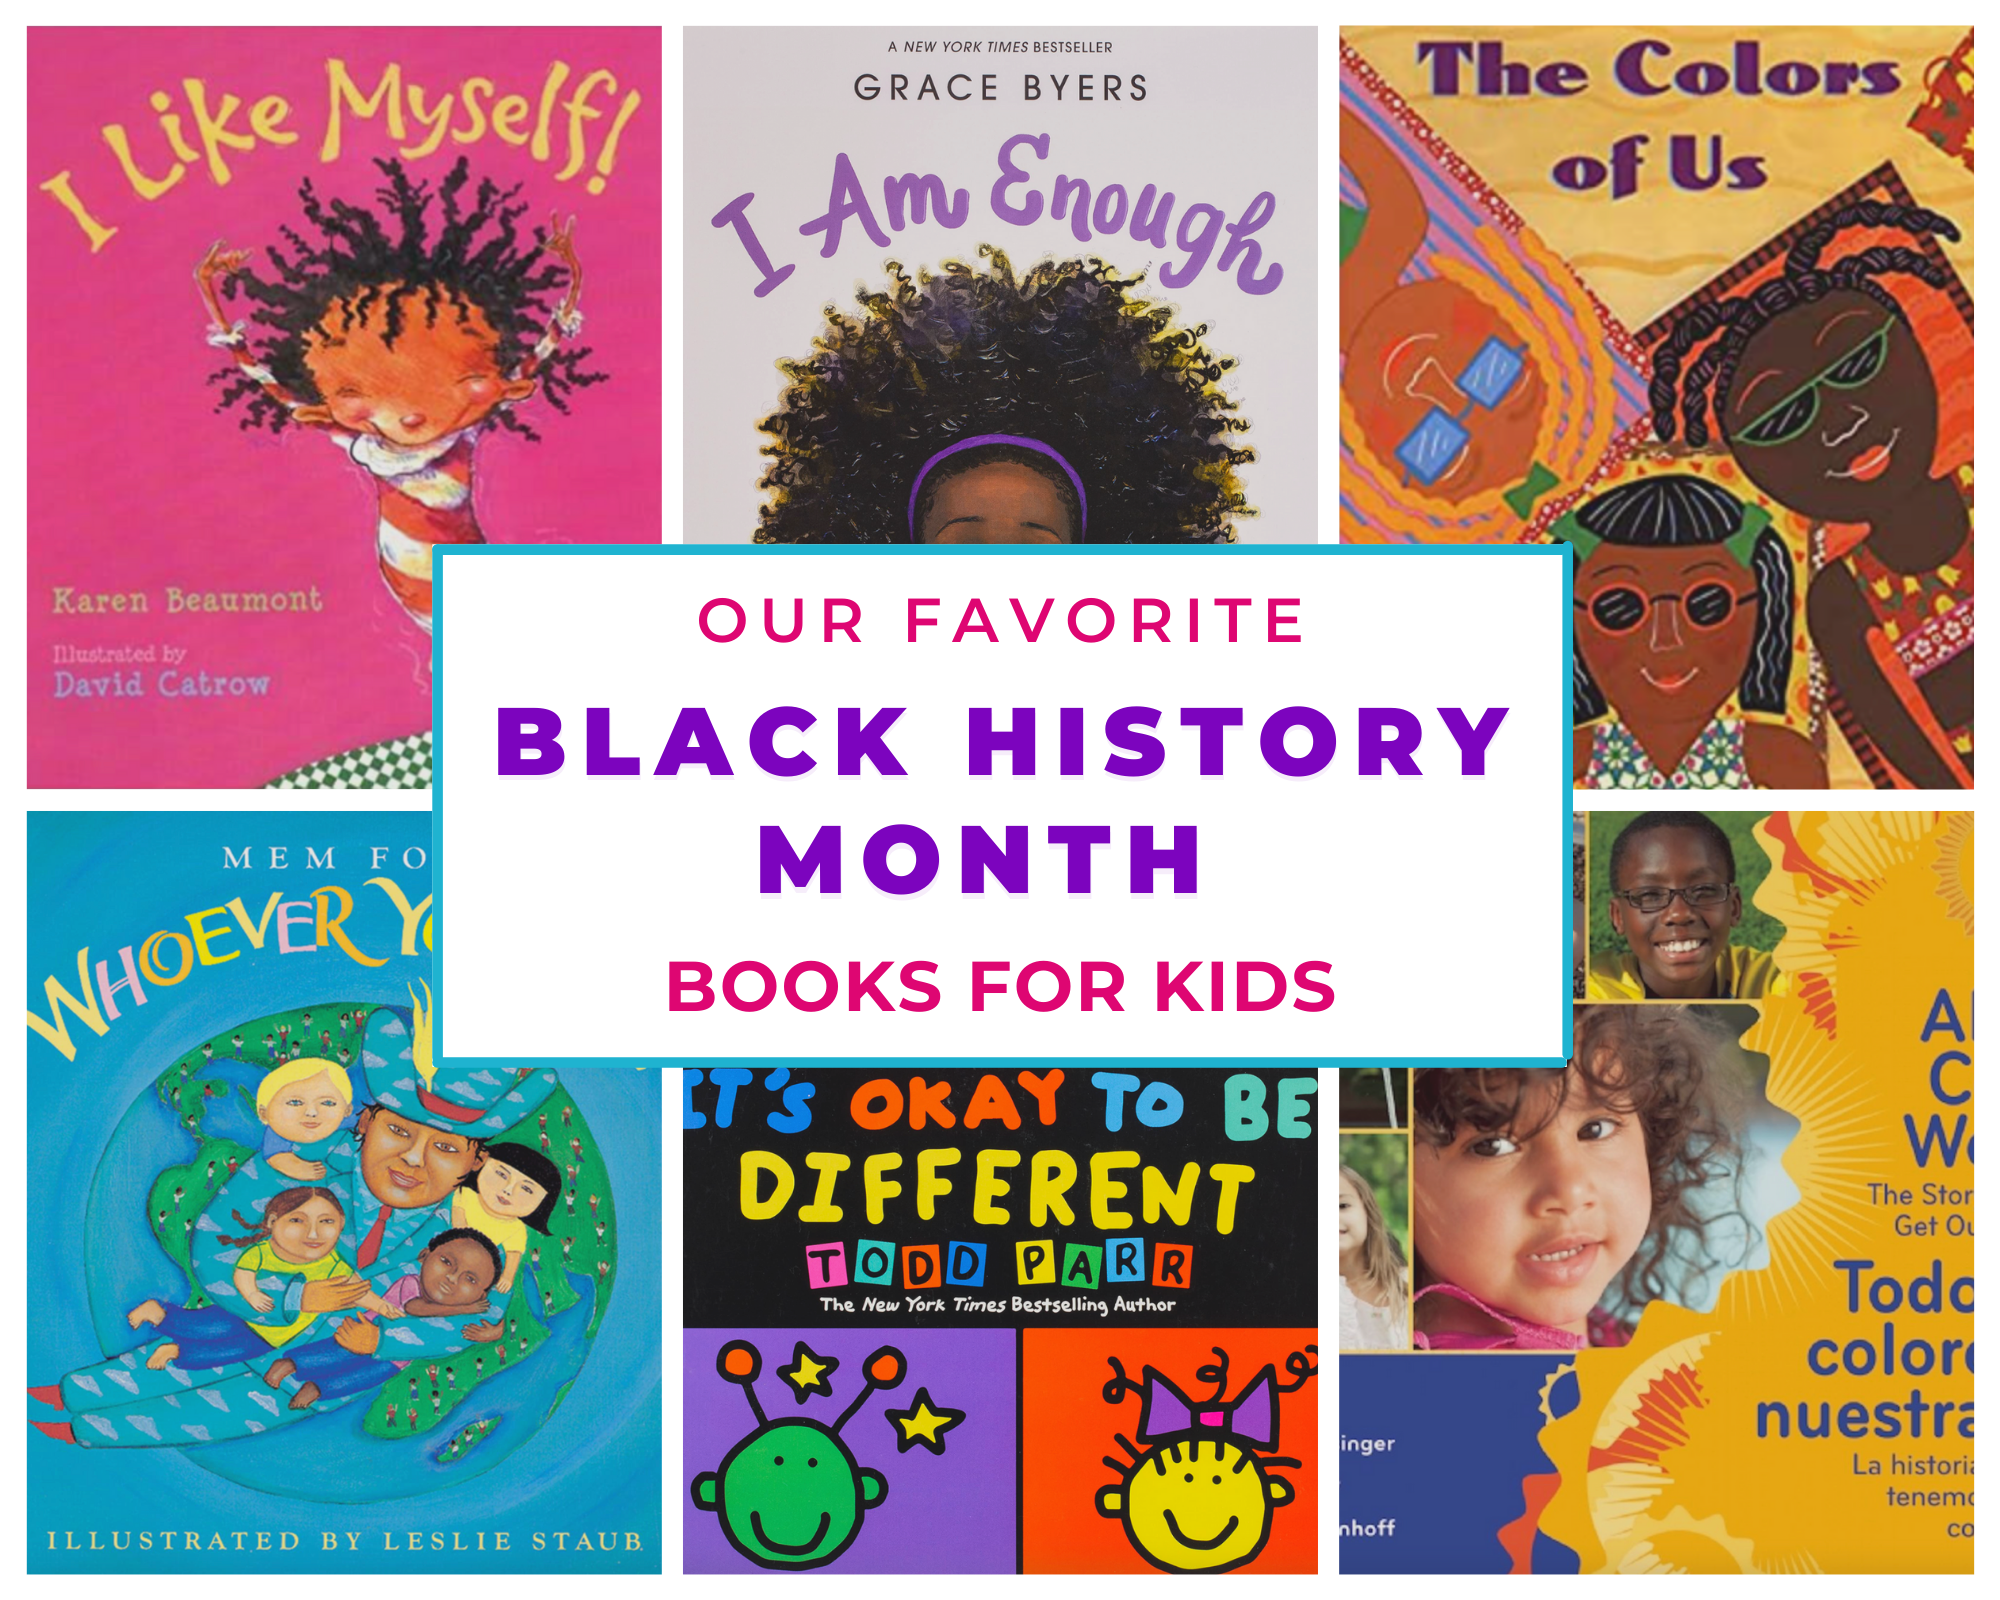 Our Favorite Black History Month Books for Kids